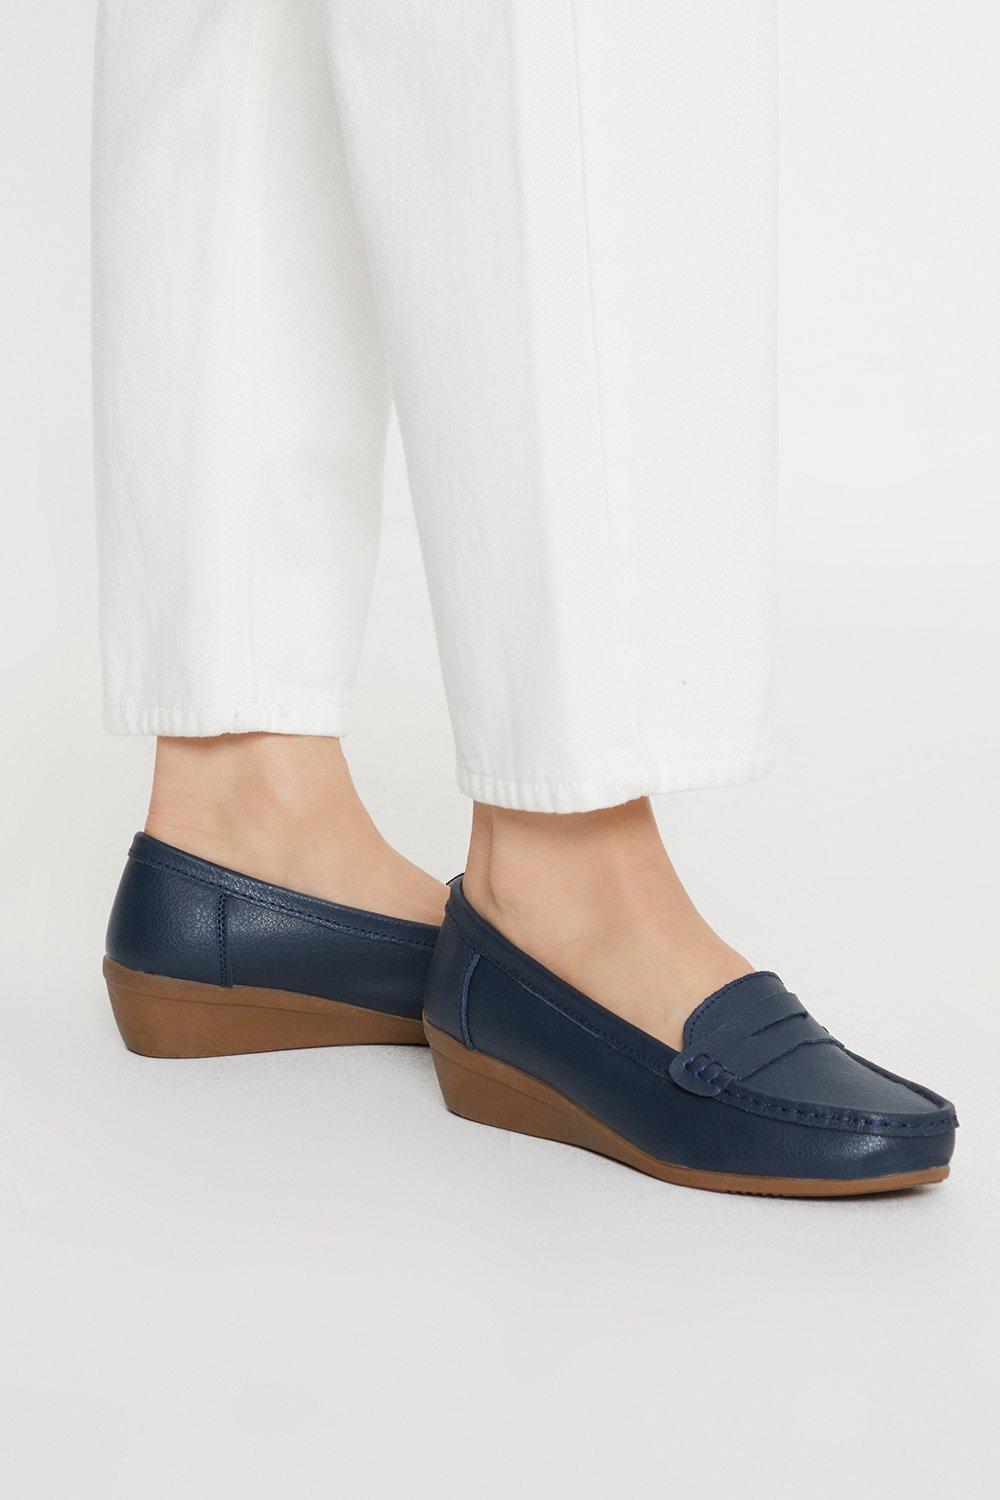 Women’s Good For The Sole: Niamh Wide Fit Leather Comfort Loafers - navy - 4